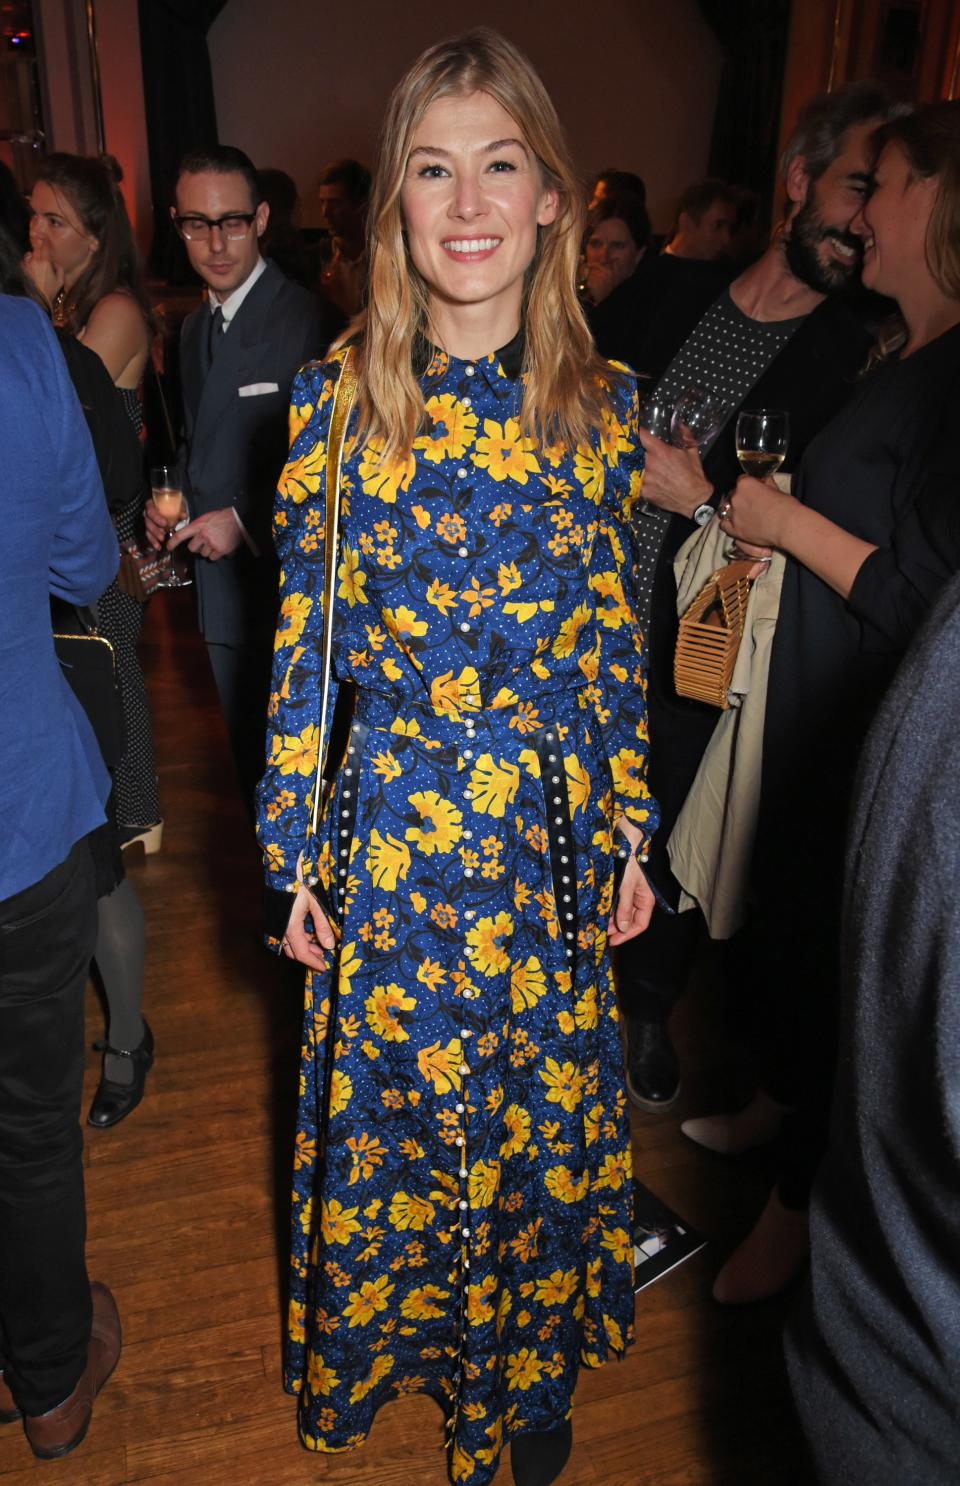 <p>WHO: Rosamund Pike</p> <p>WHAT: Altuzarra</p> <p>WHERE: After-party for <em>Three Billboards Outside Ebbing, Missouri,</em> London</p> <p>WHEN: October 15, 2017</p>